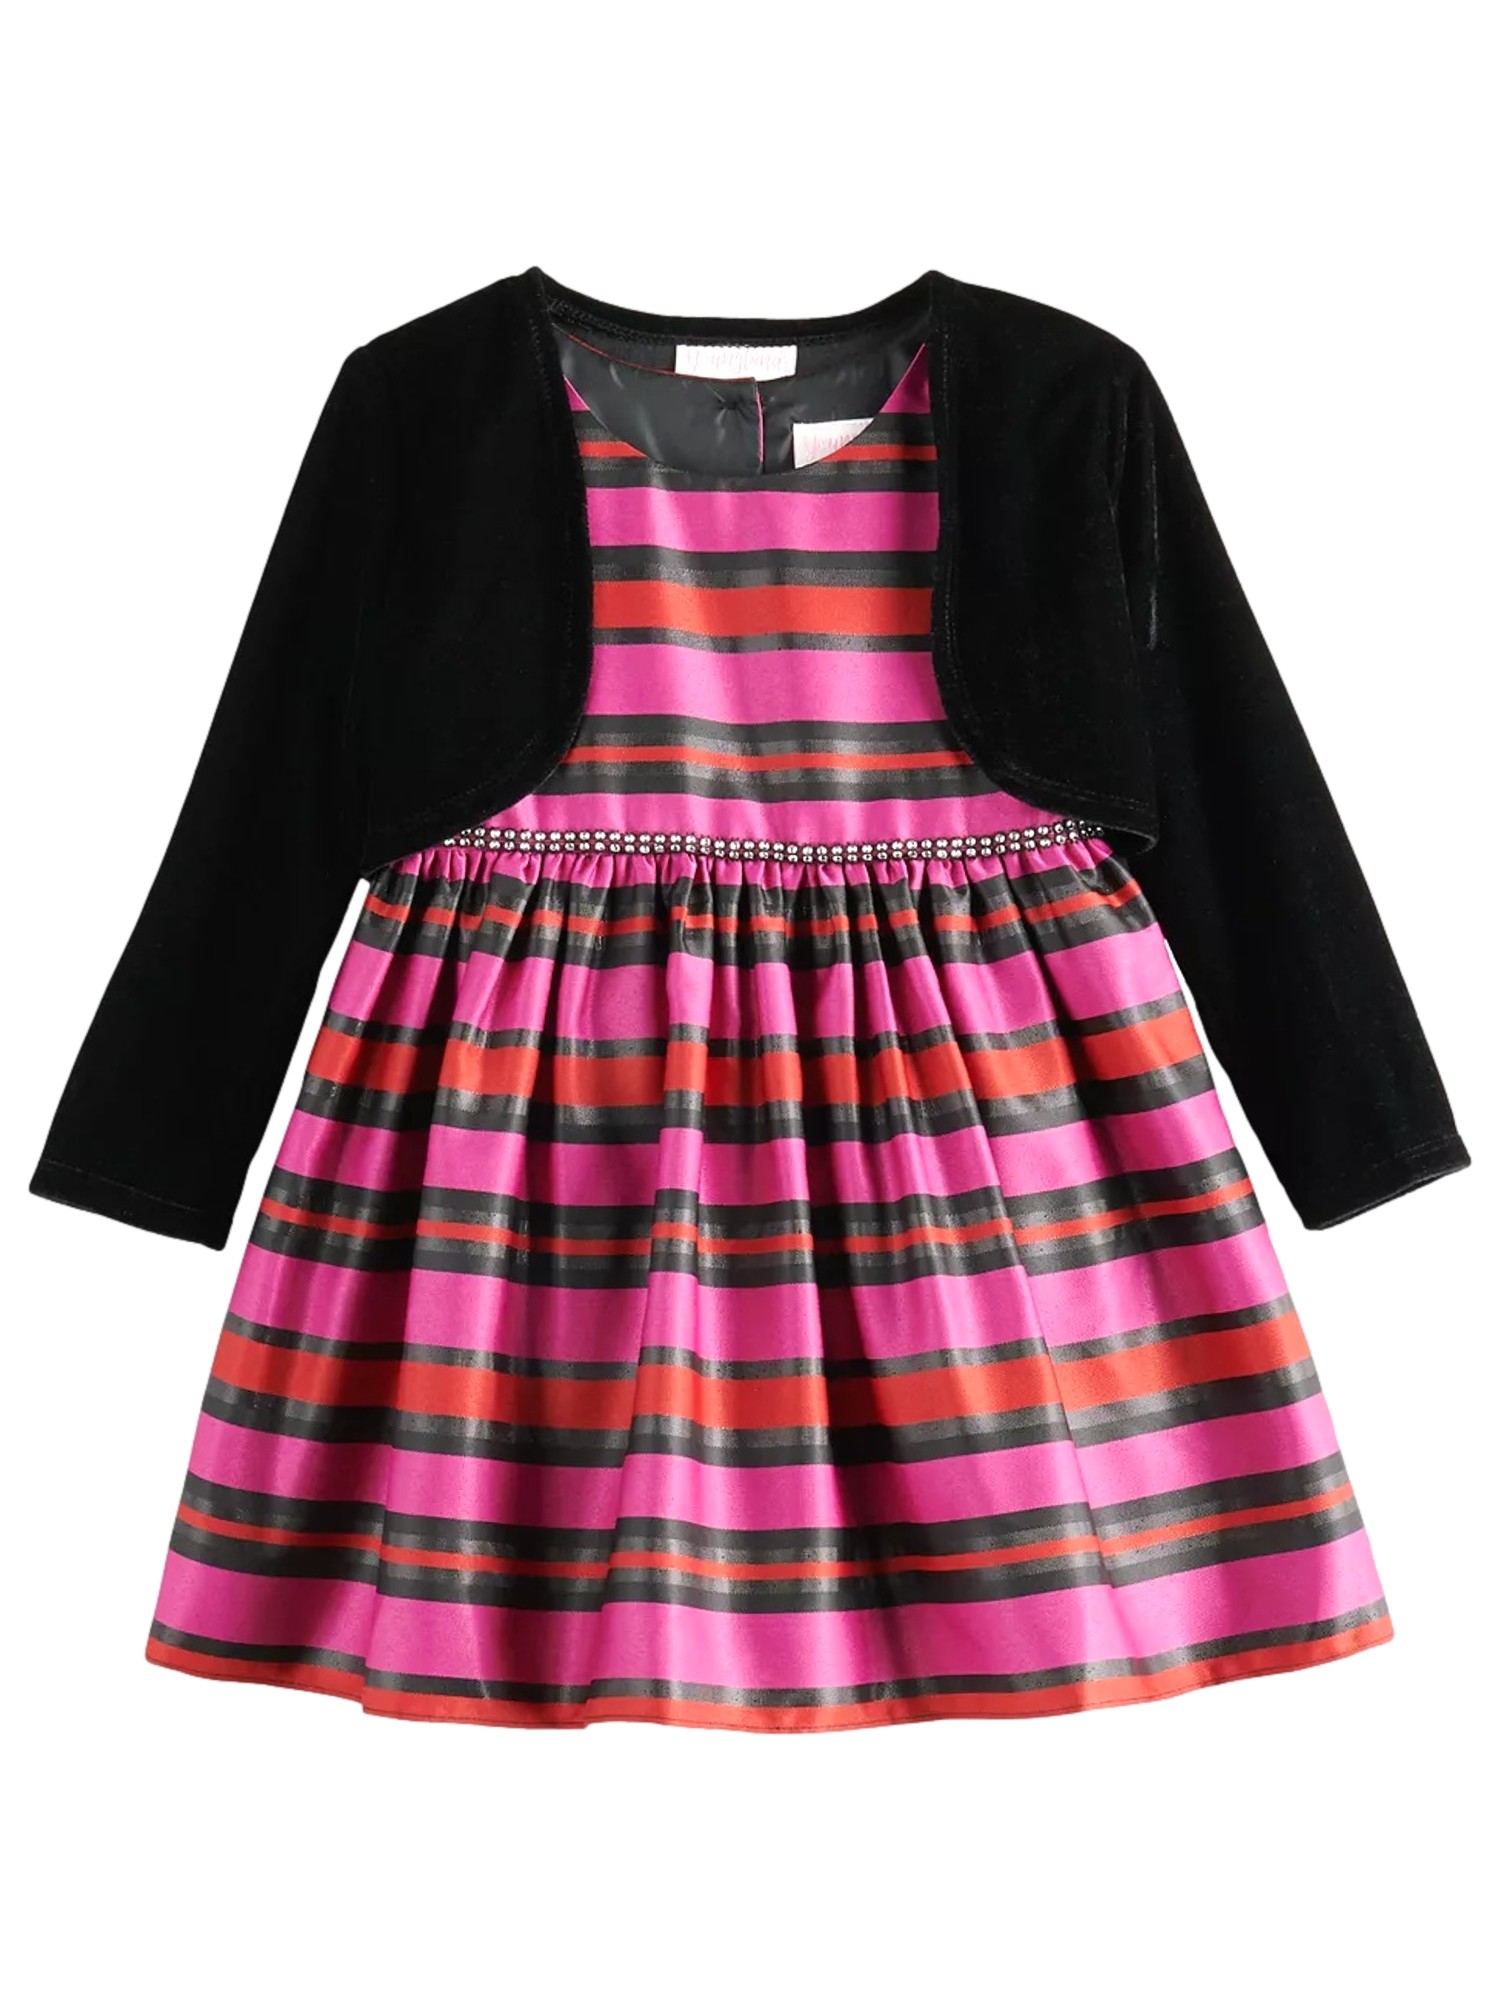 Youngland Toddler Girls Pink Black Red Striped Satin Tank Party Dress & Shrug 2T